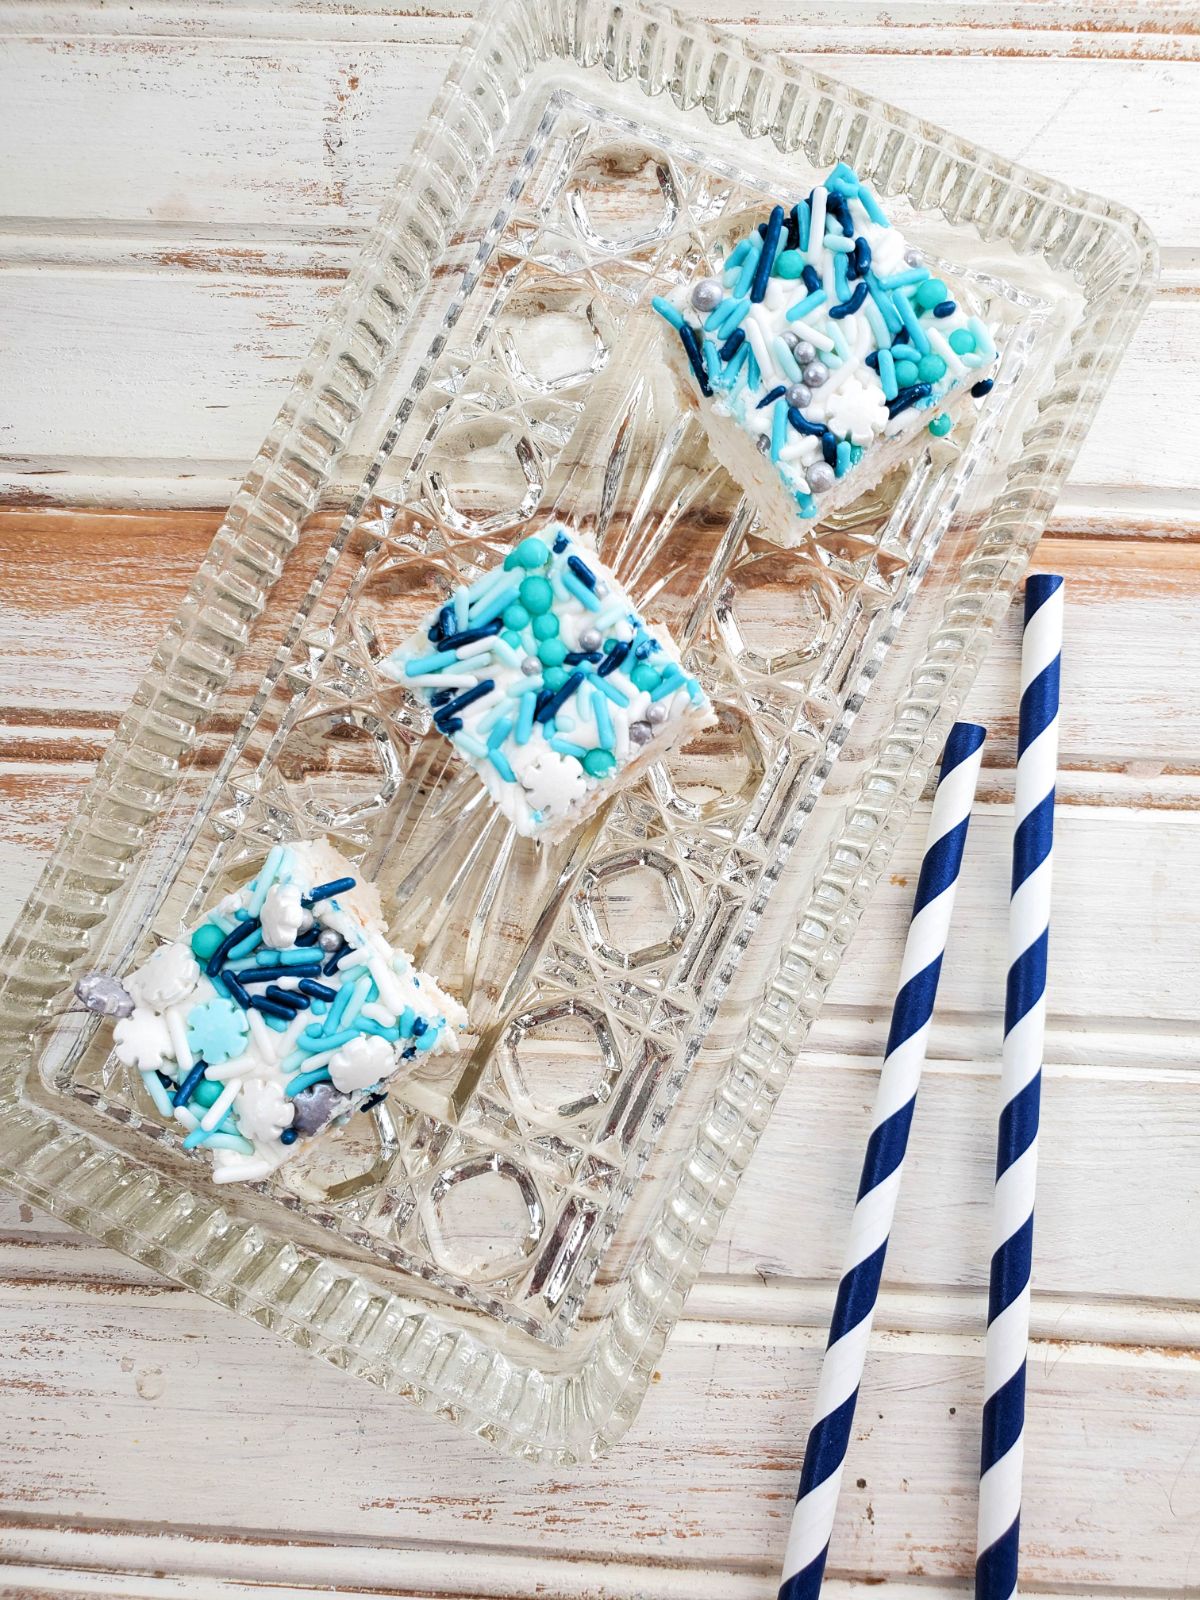 Sugar Cookie Fudge on a serving plate with party straws on the side. 